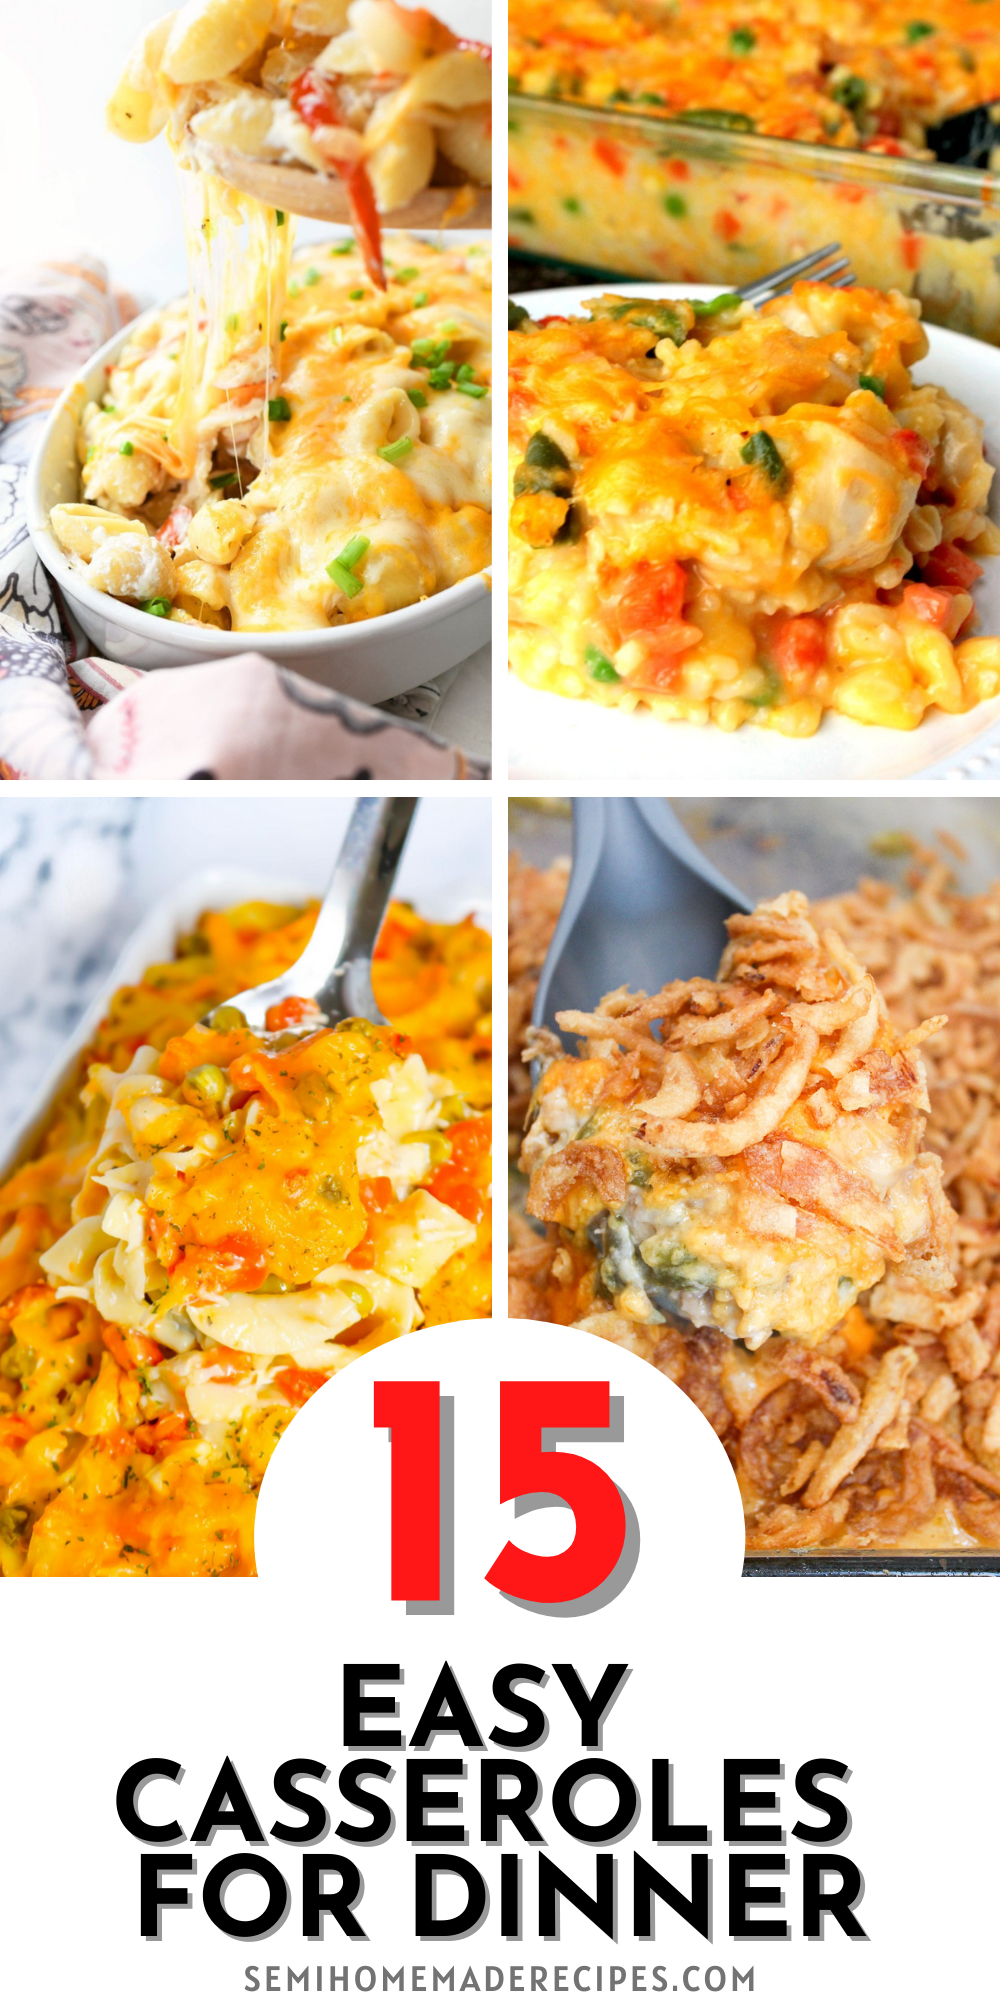 15 Easy Casseroles for Dinner - Casseroles are an easy, toss together meal that's perfect for busy weeknights and activity filled weekends! Here are 15 Easy Casseroles for Dinner or lunch that you'll want to make again and again! 